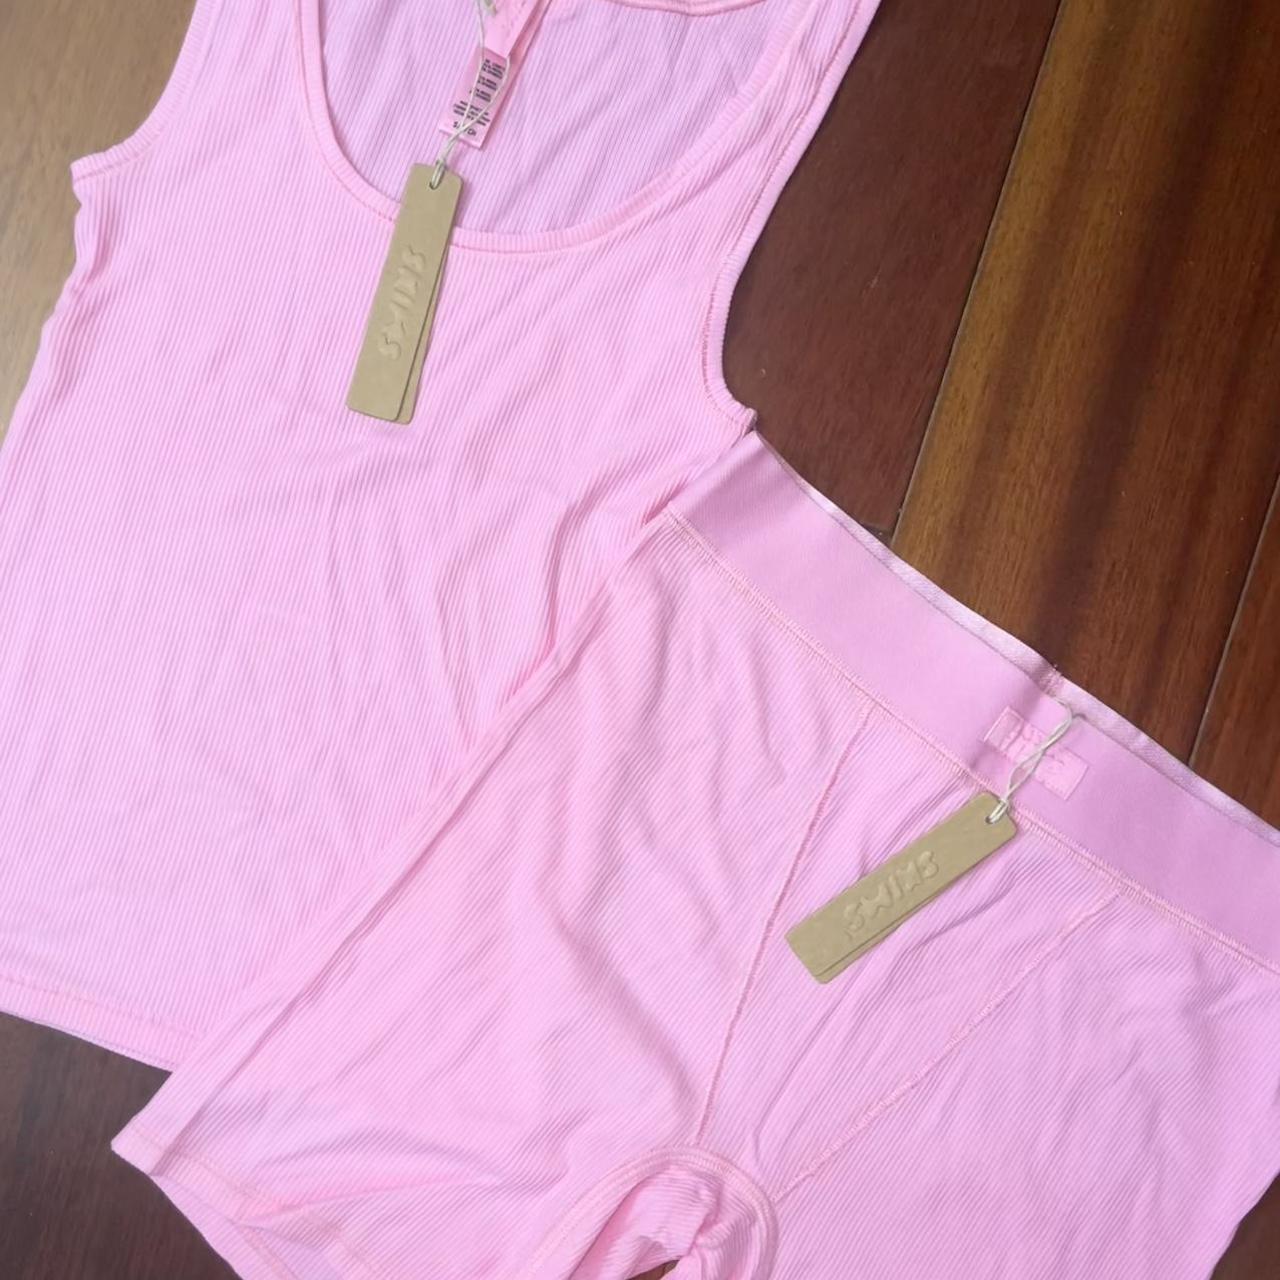 Buy SKIMS Pink Soft Lounge Tank Top - Cotton Candy At 20% Off